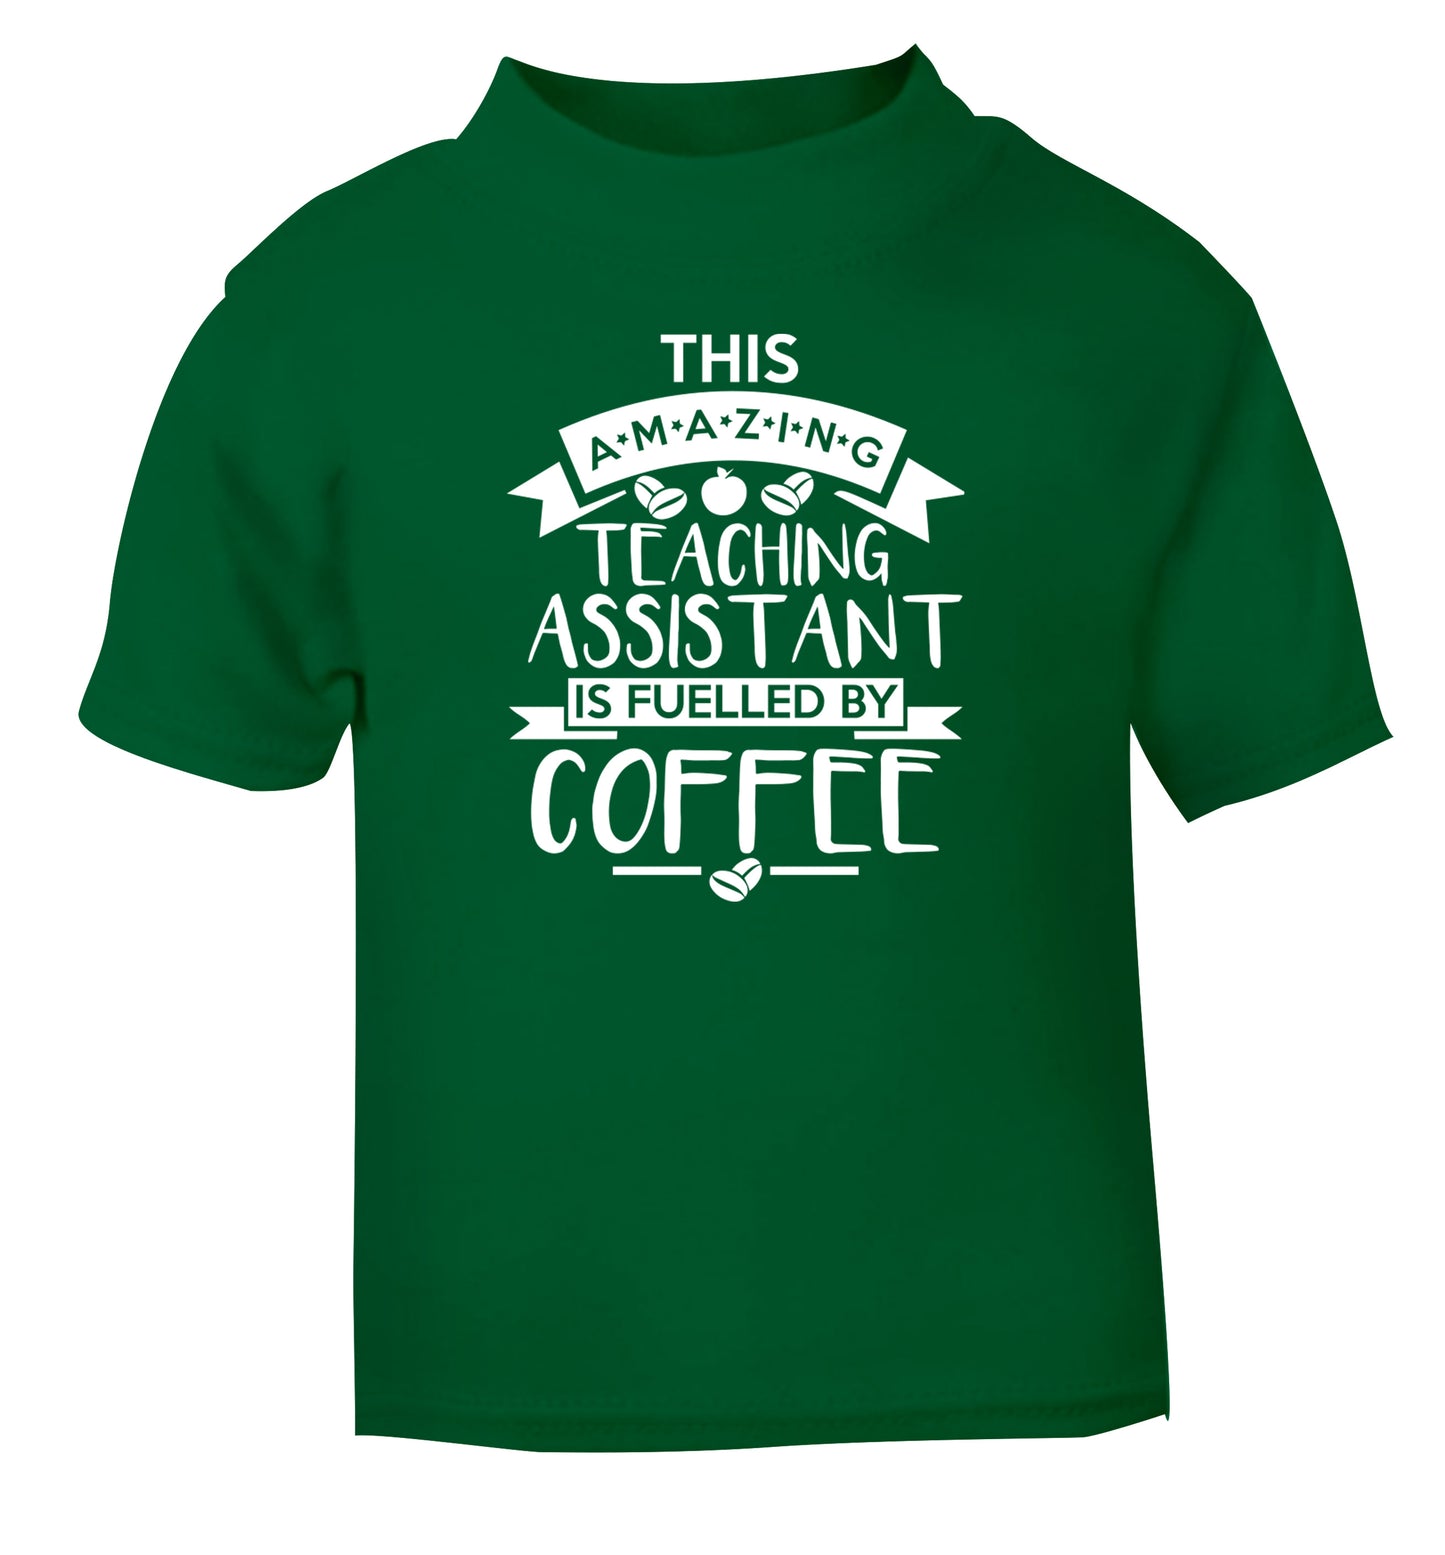 This amazing teaching assistant is fuelled by coffee green Baby Toddler Tshirt 2 Years